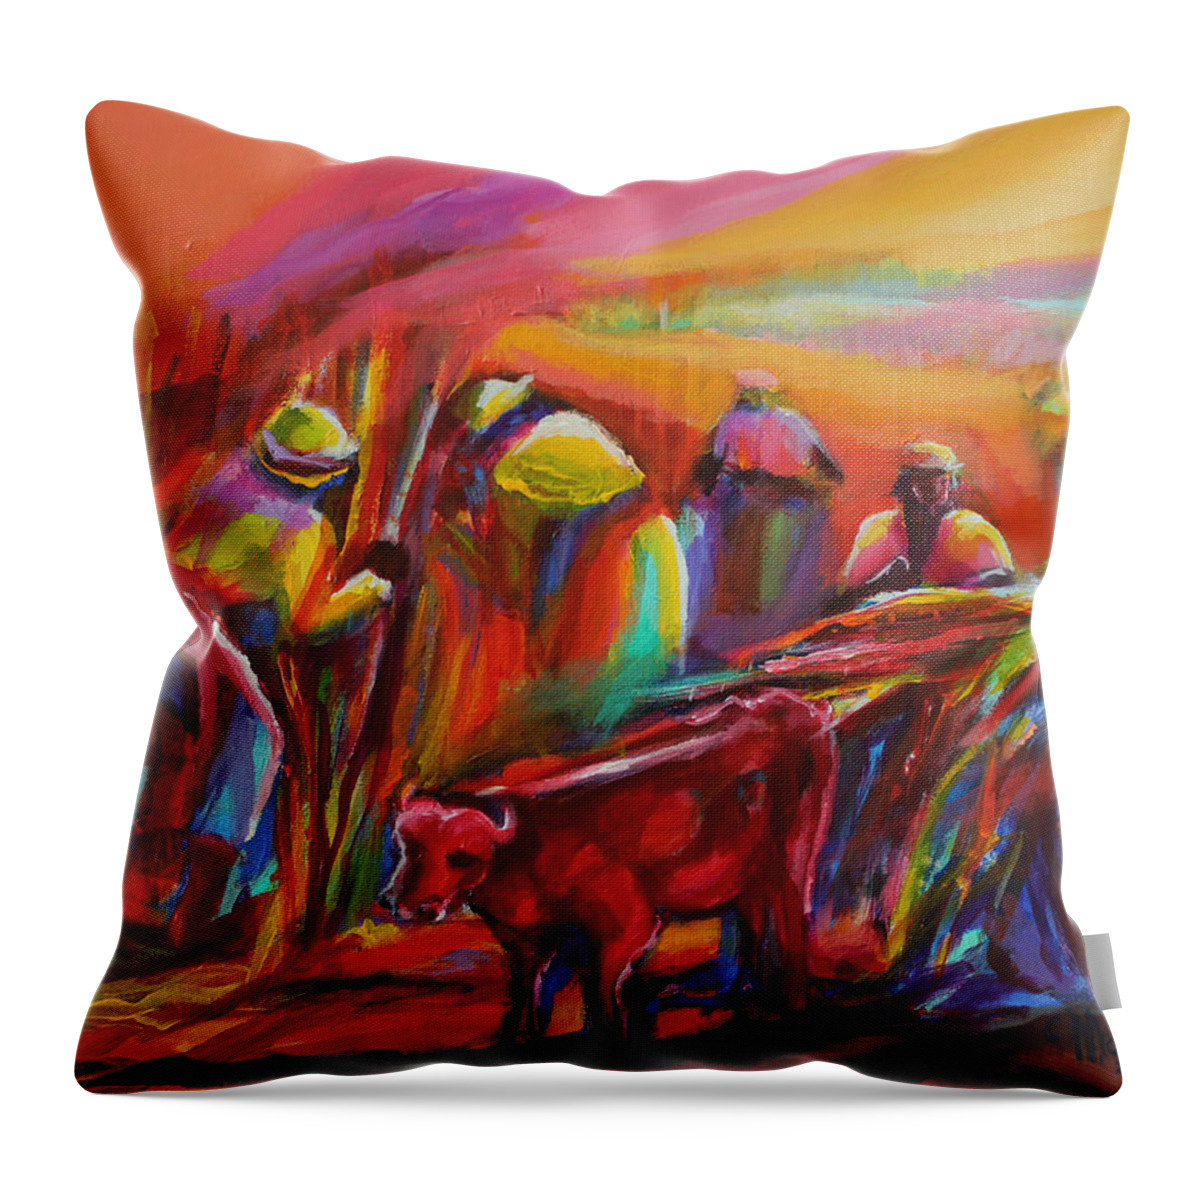 Abstract Throw Pillow featuring the painting Cane Harvest Ox by Cynthia McLean